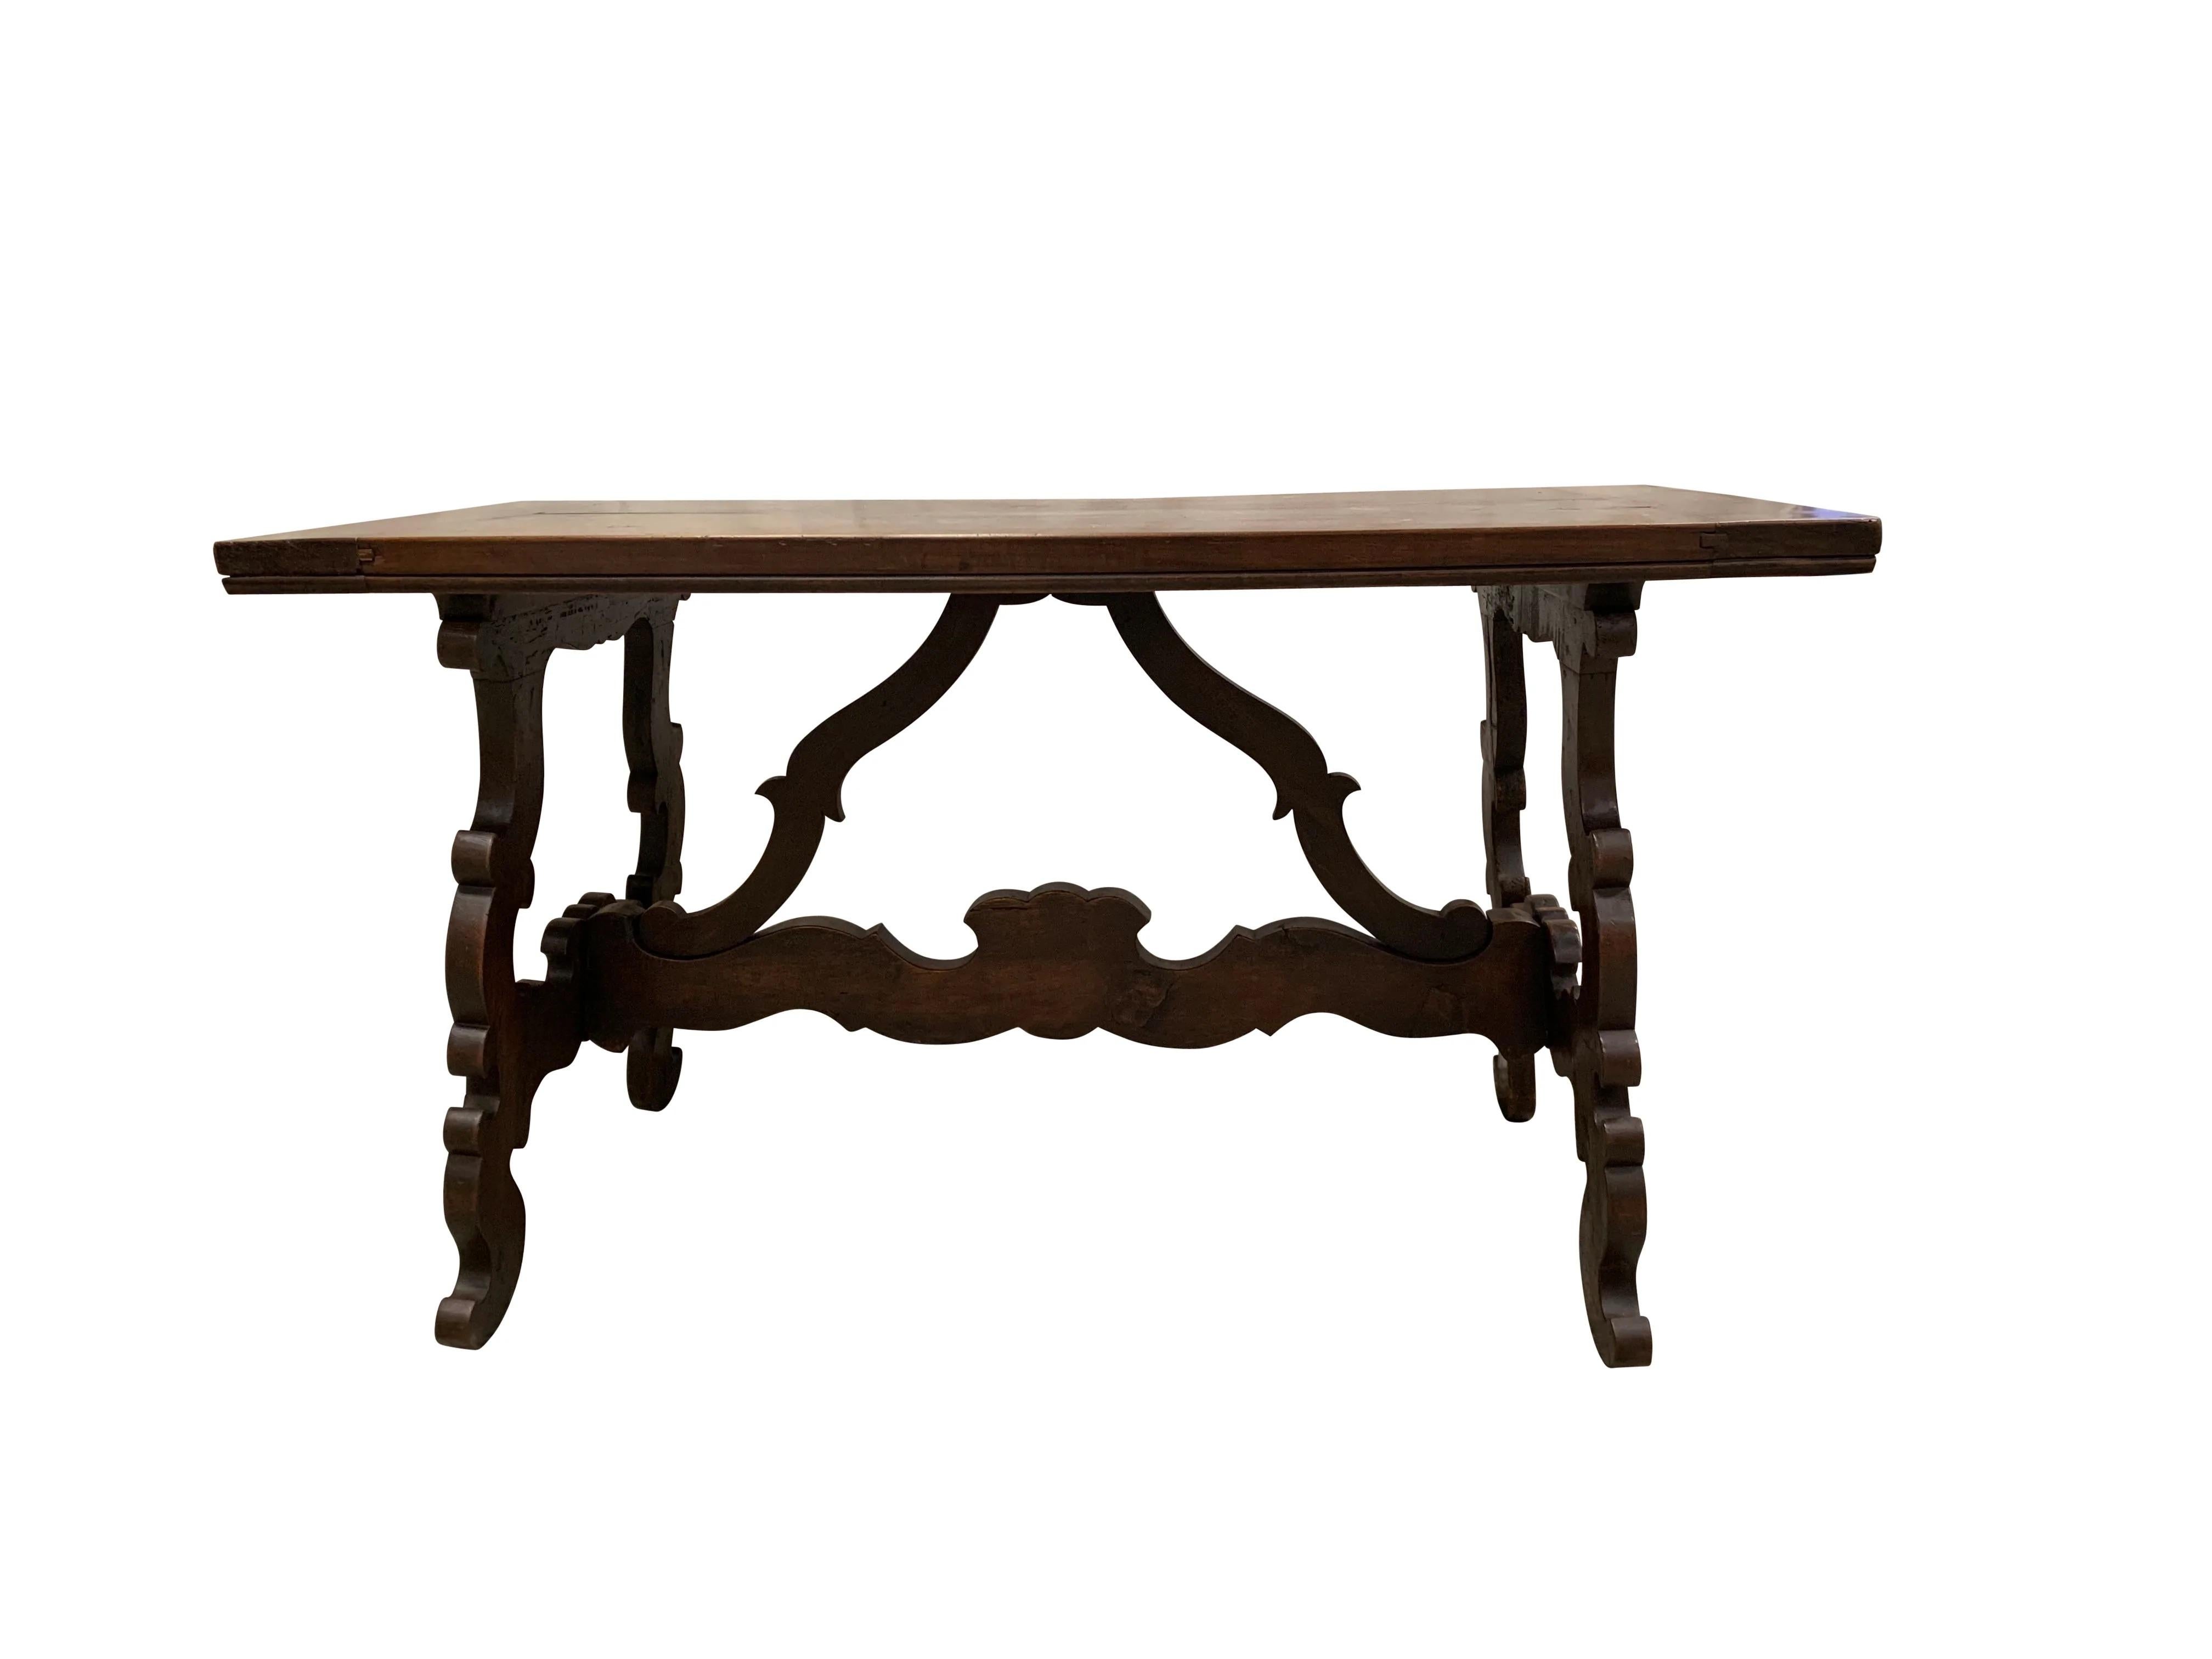 A Walnut Fratino Table from the late 19th century. Featuring a rectangular top, the table is raised on four Baroque style lyre shaped legs that is connected by a beautifully carved cross stretcher. Perfect to place against a wall in a foyer,